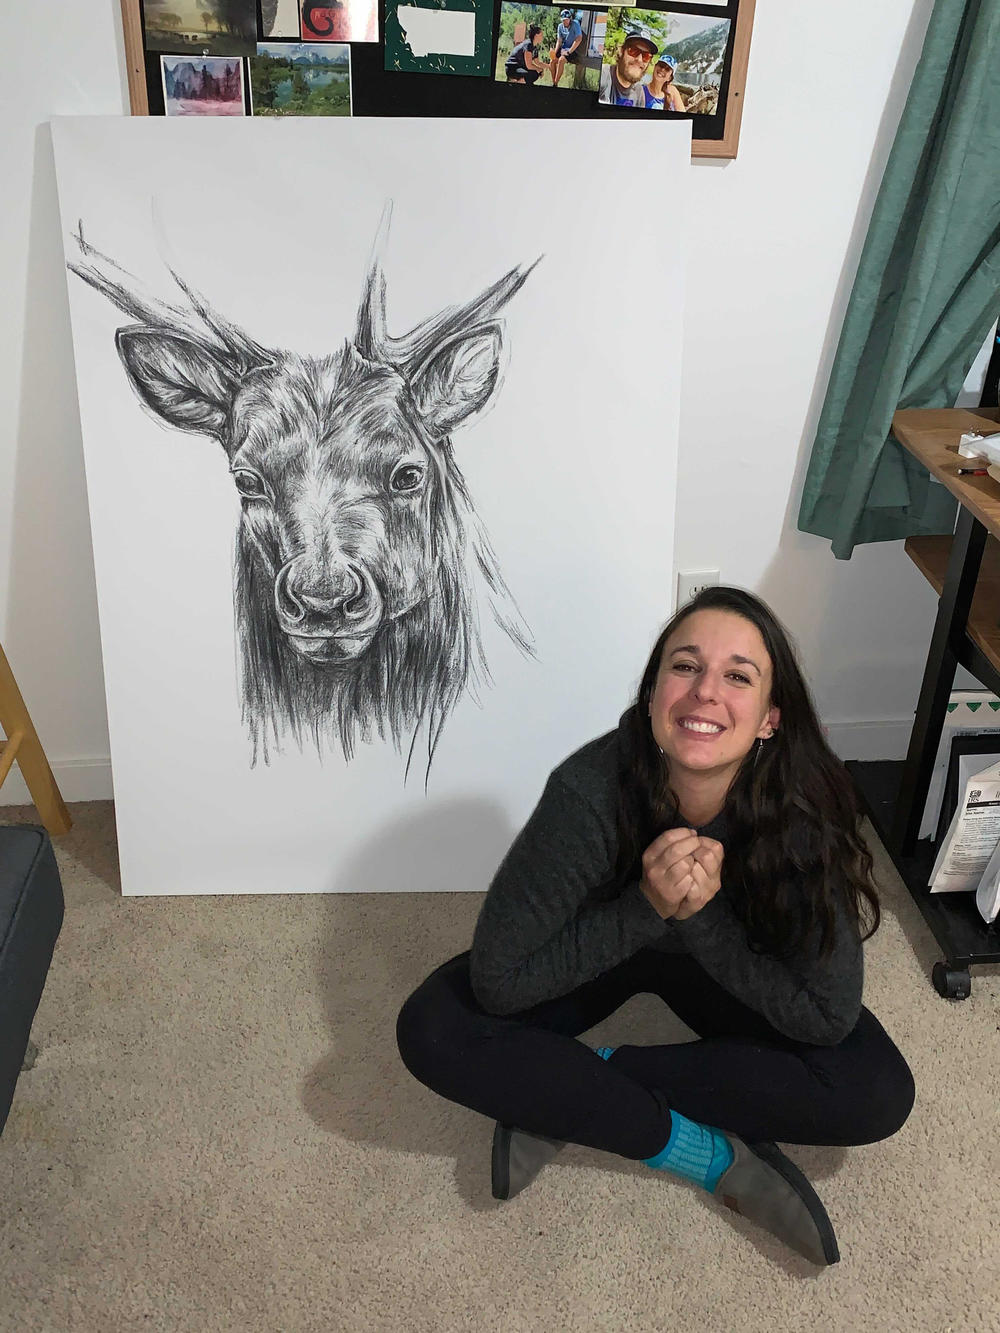 Maggie Slepian spent at least 12 hours on FaceTime with her sibling Harry to finish this drawing of an elk.